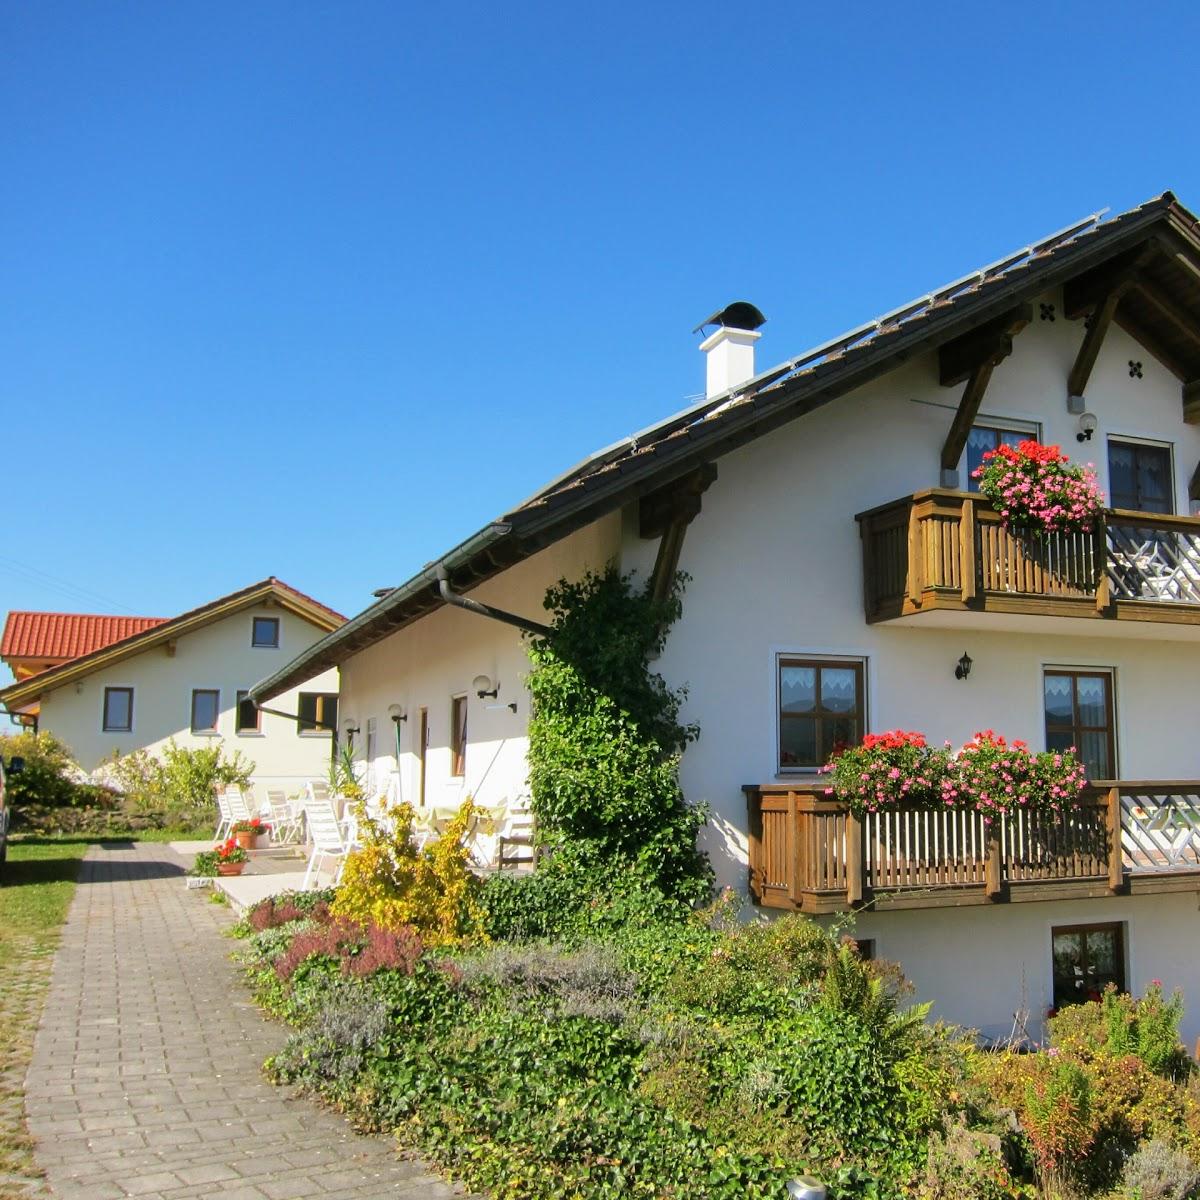 Restaurant "Familie Frankl" in Haselbach